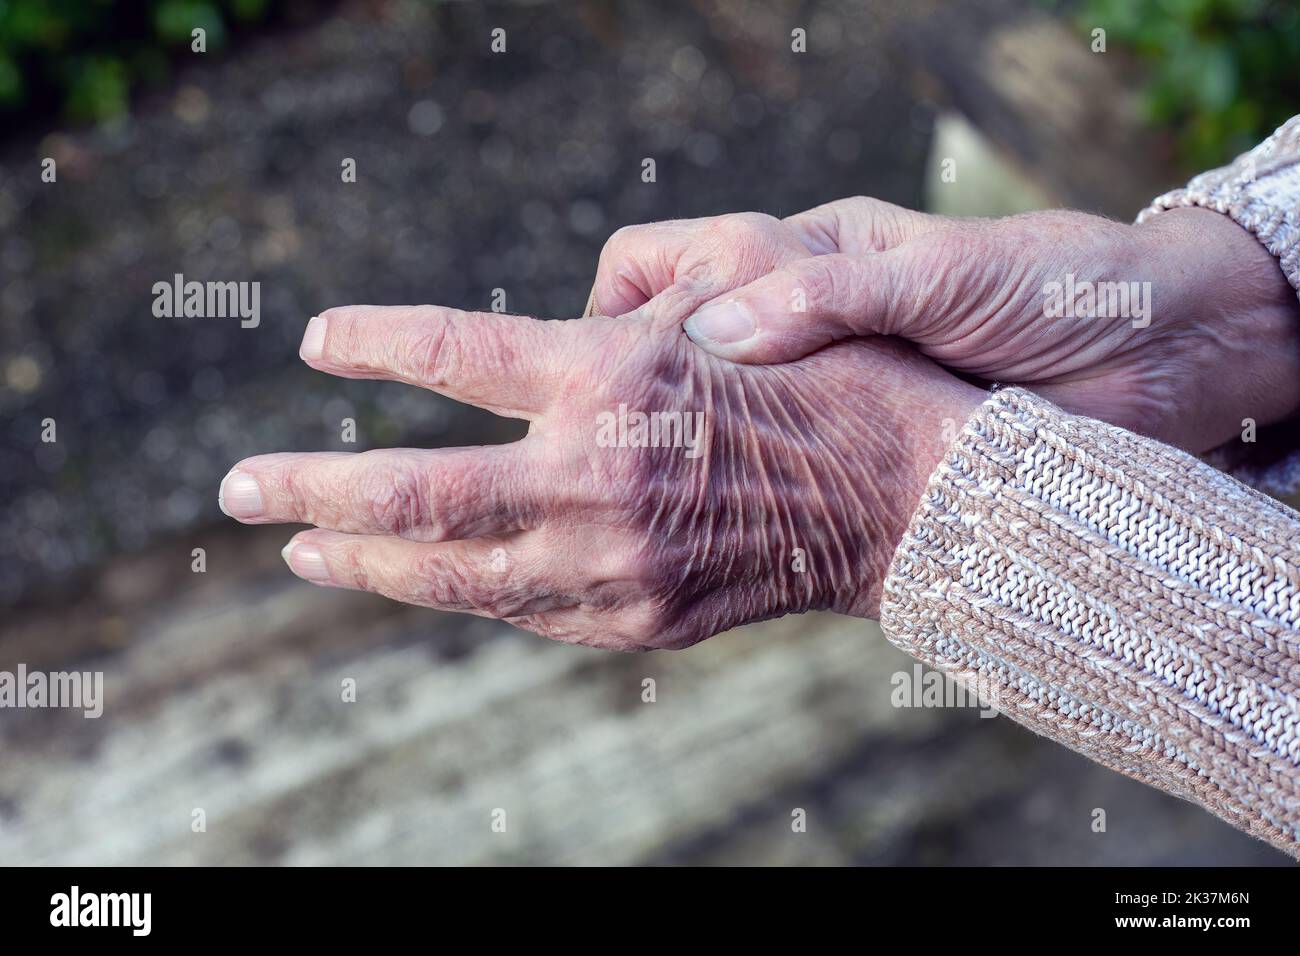 close-up of old woman rubbing her hands Stock Photo